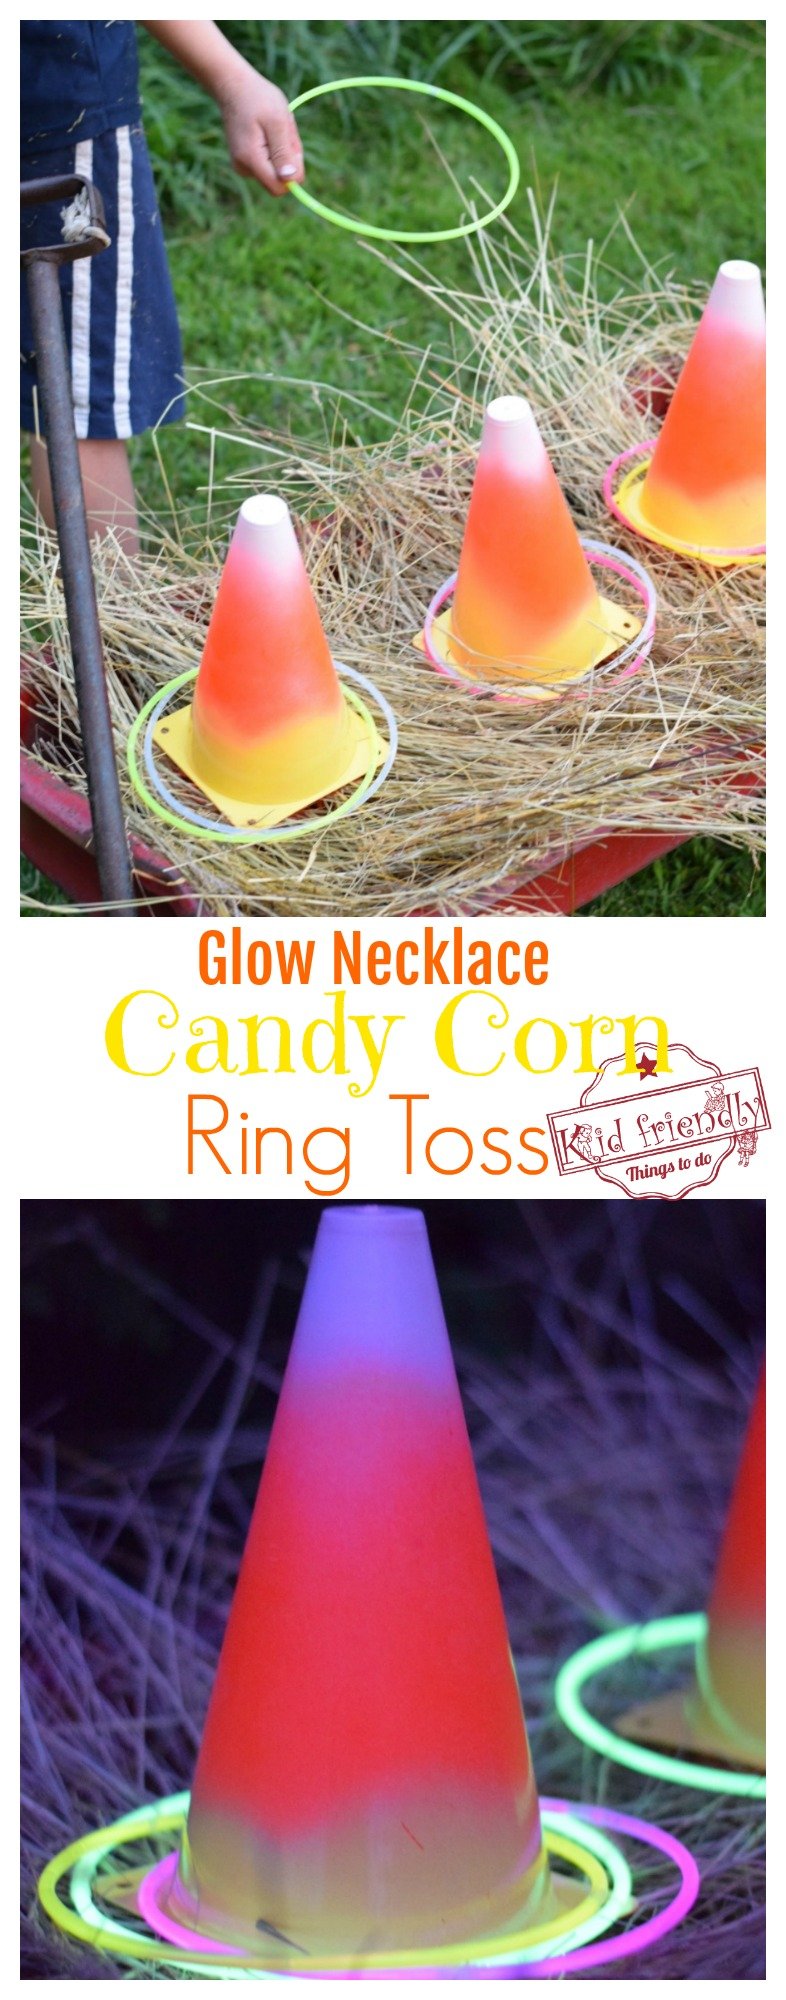 Easy DIY Candy Corn Ring Toss with Glow Necklaces for a Fun Fall, Halloween, or Thanksgiving Game - perfect for kid's school party, teens, harvest parties, or family fun! www.kidfriendlythingstodo.com